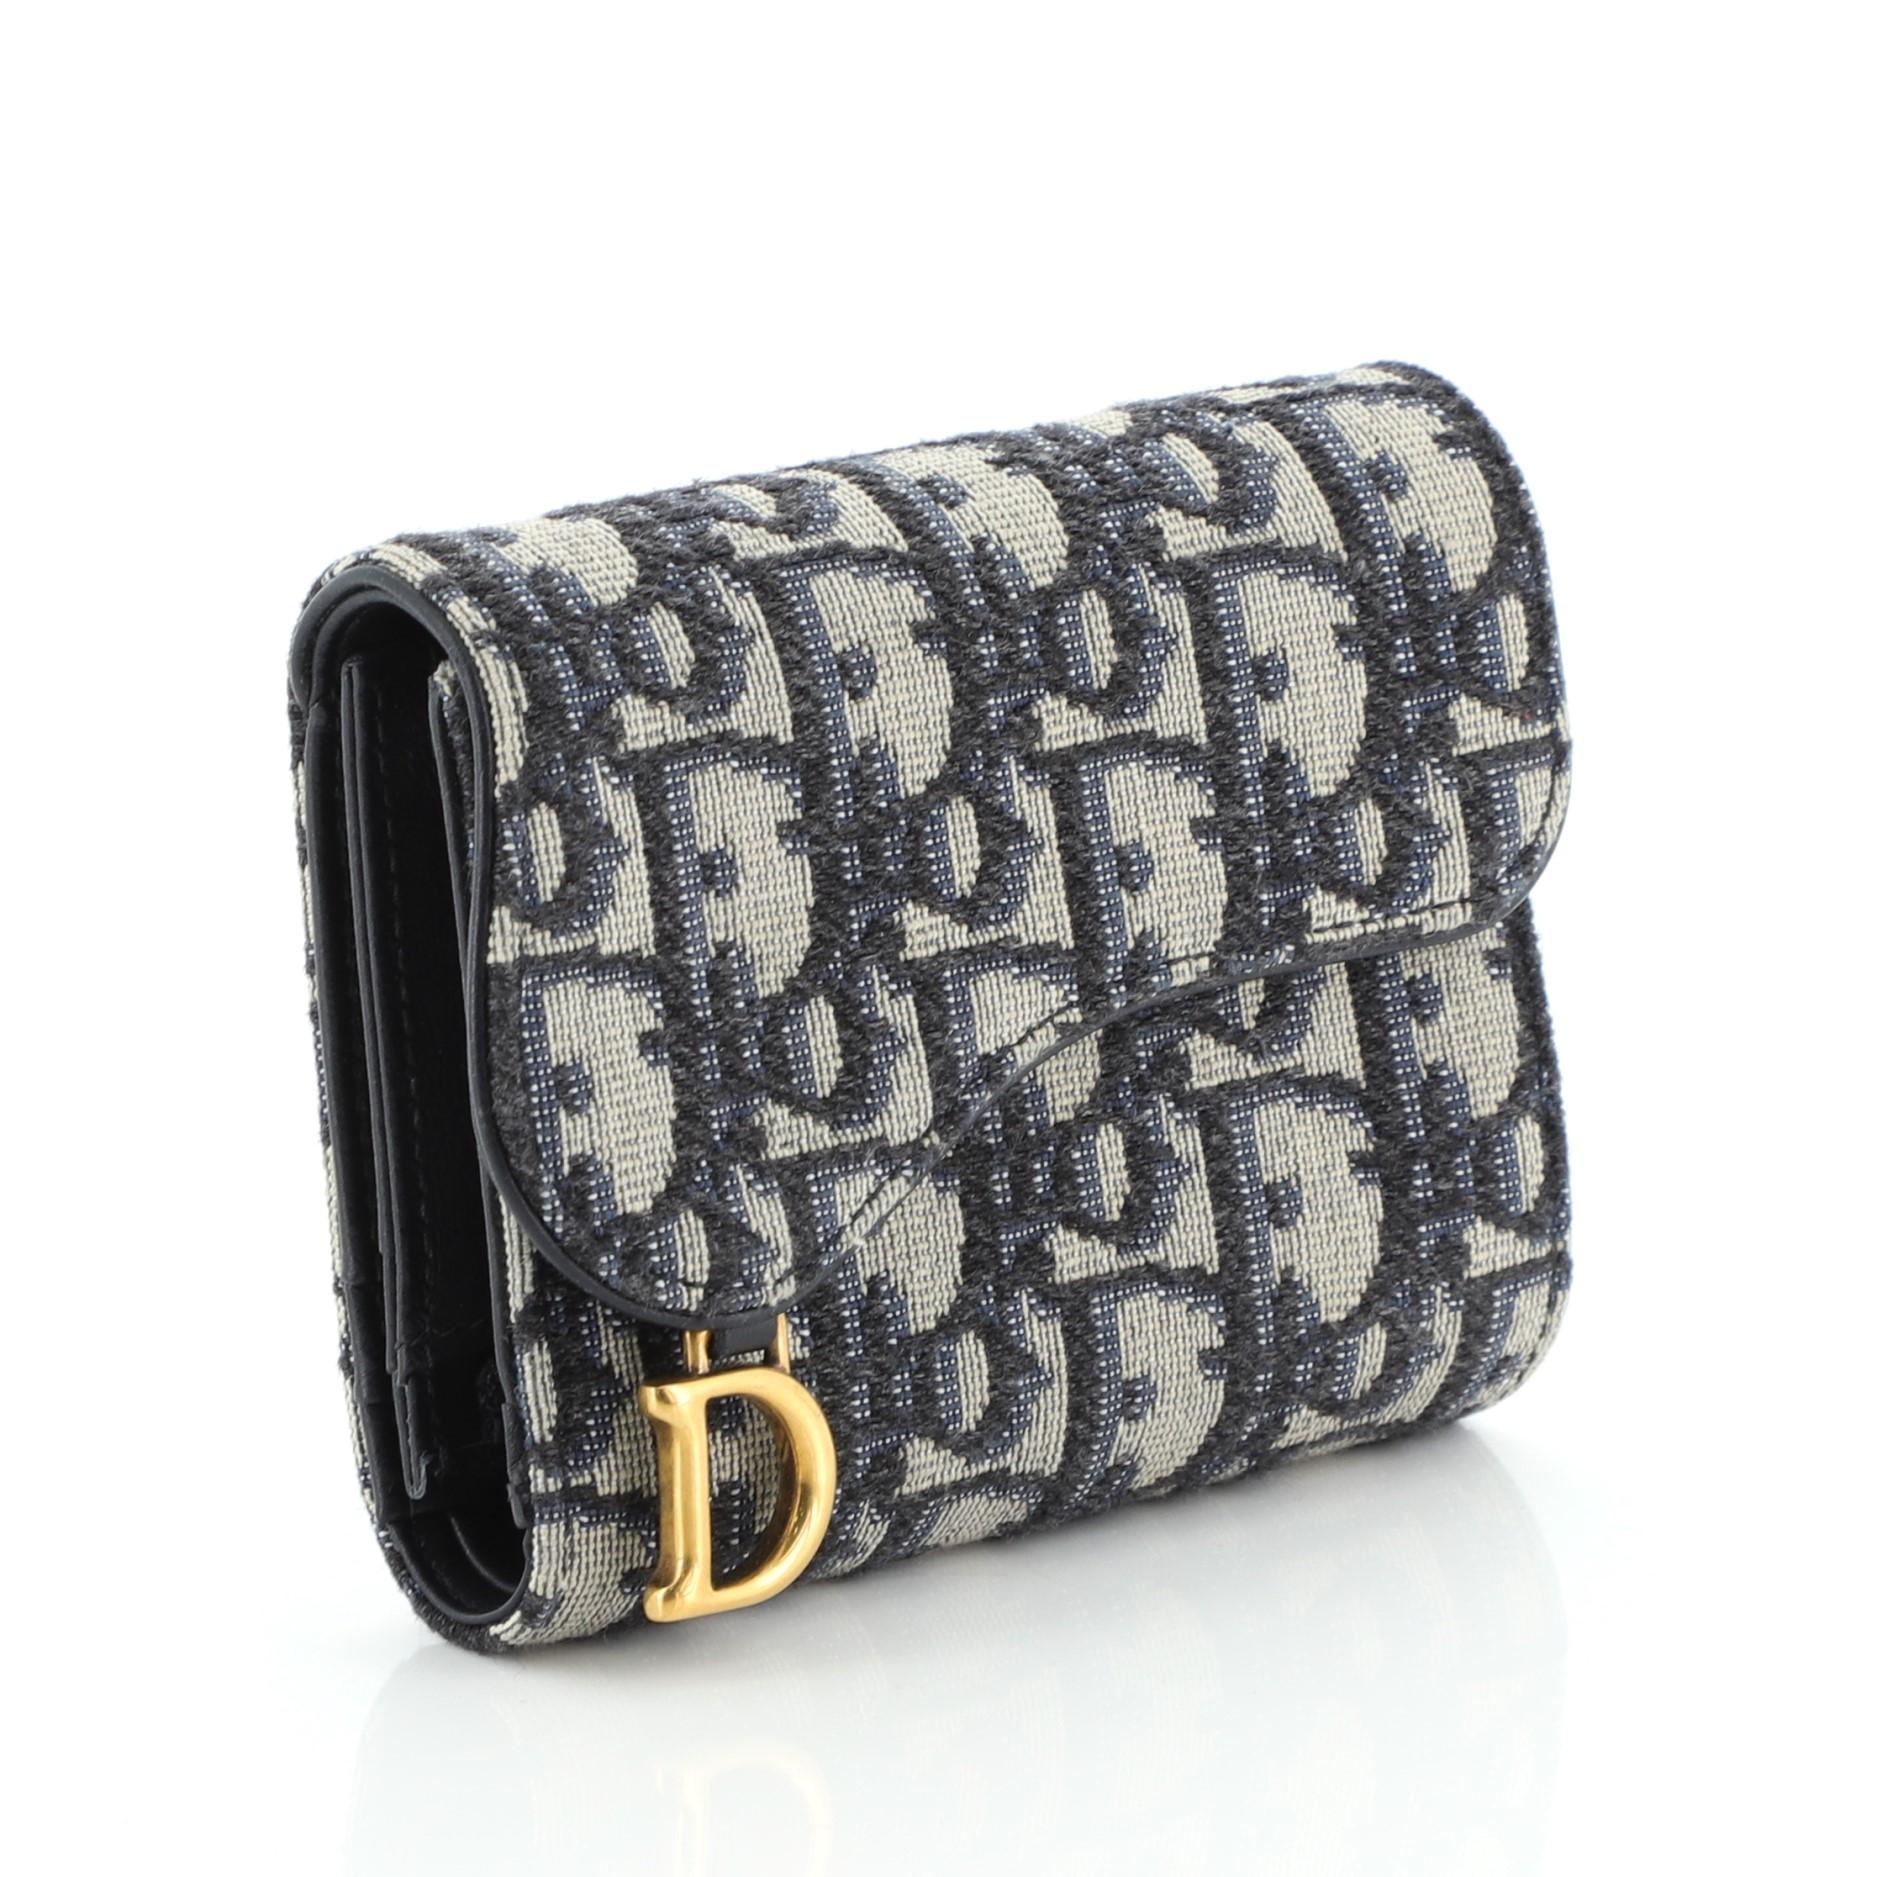 Dior Saddle Wallet Dior Saddle Flap Card Holder Organizer With Grommets  Chain  lupongovph